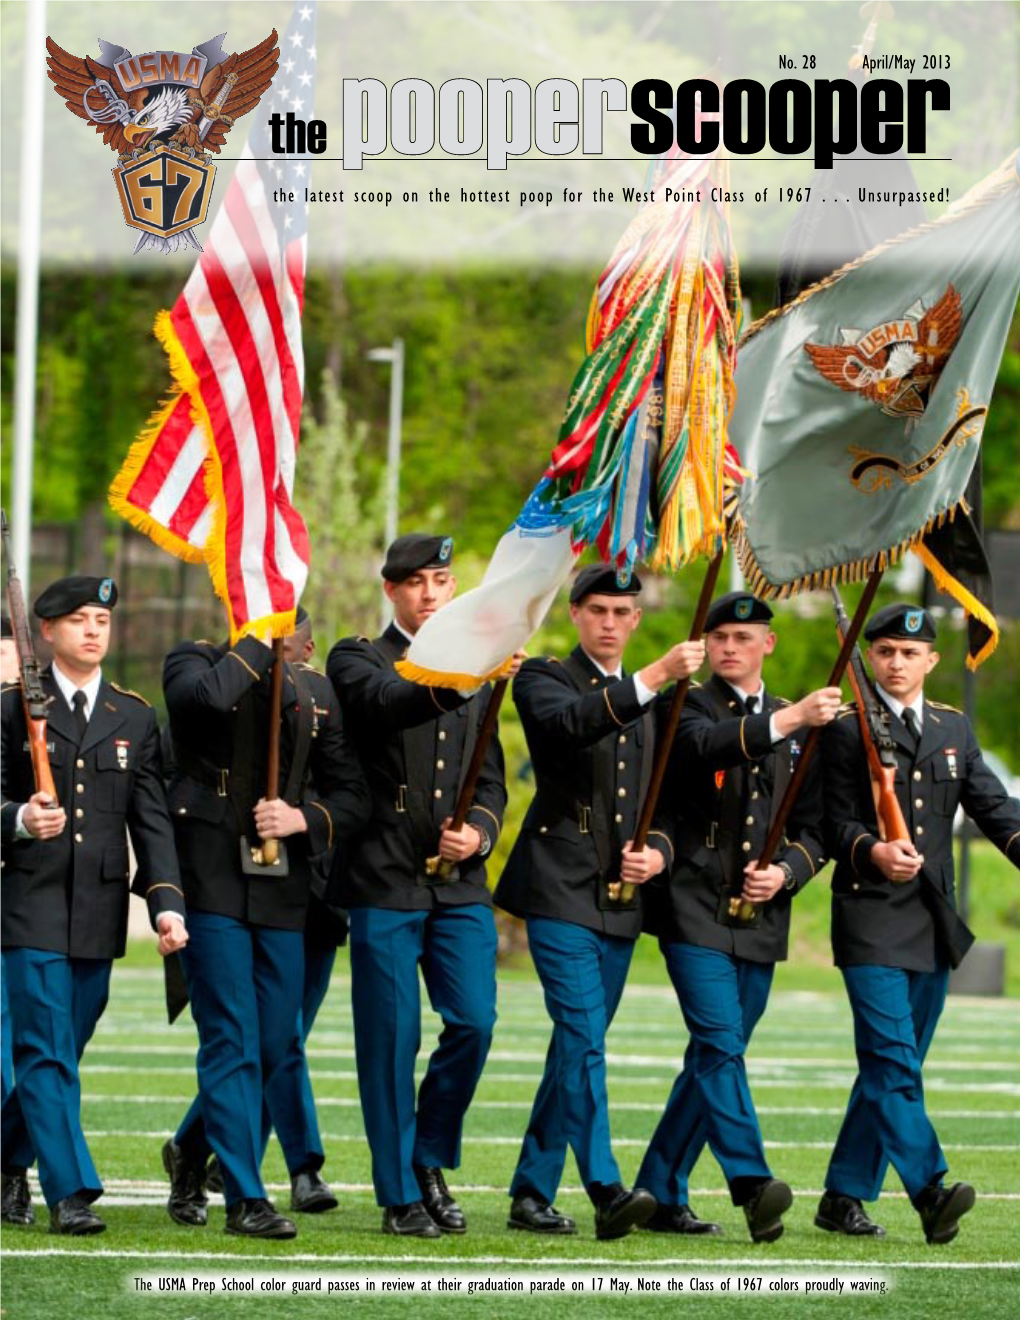 The Pooperscooper the Latest Scoop on the Hottest Poop for the West Point Class of 1967